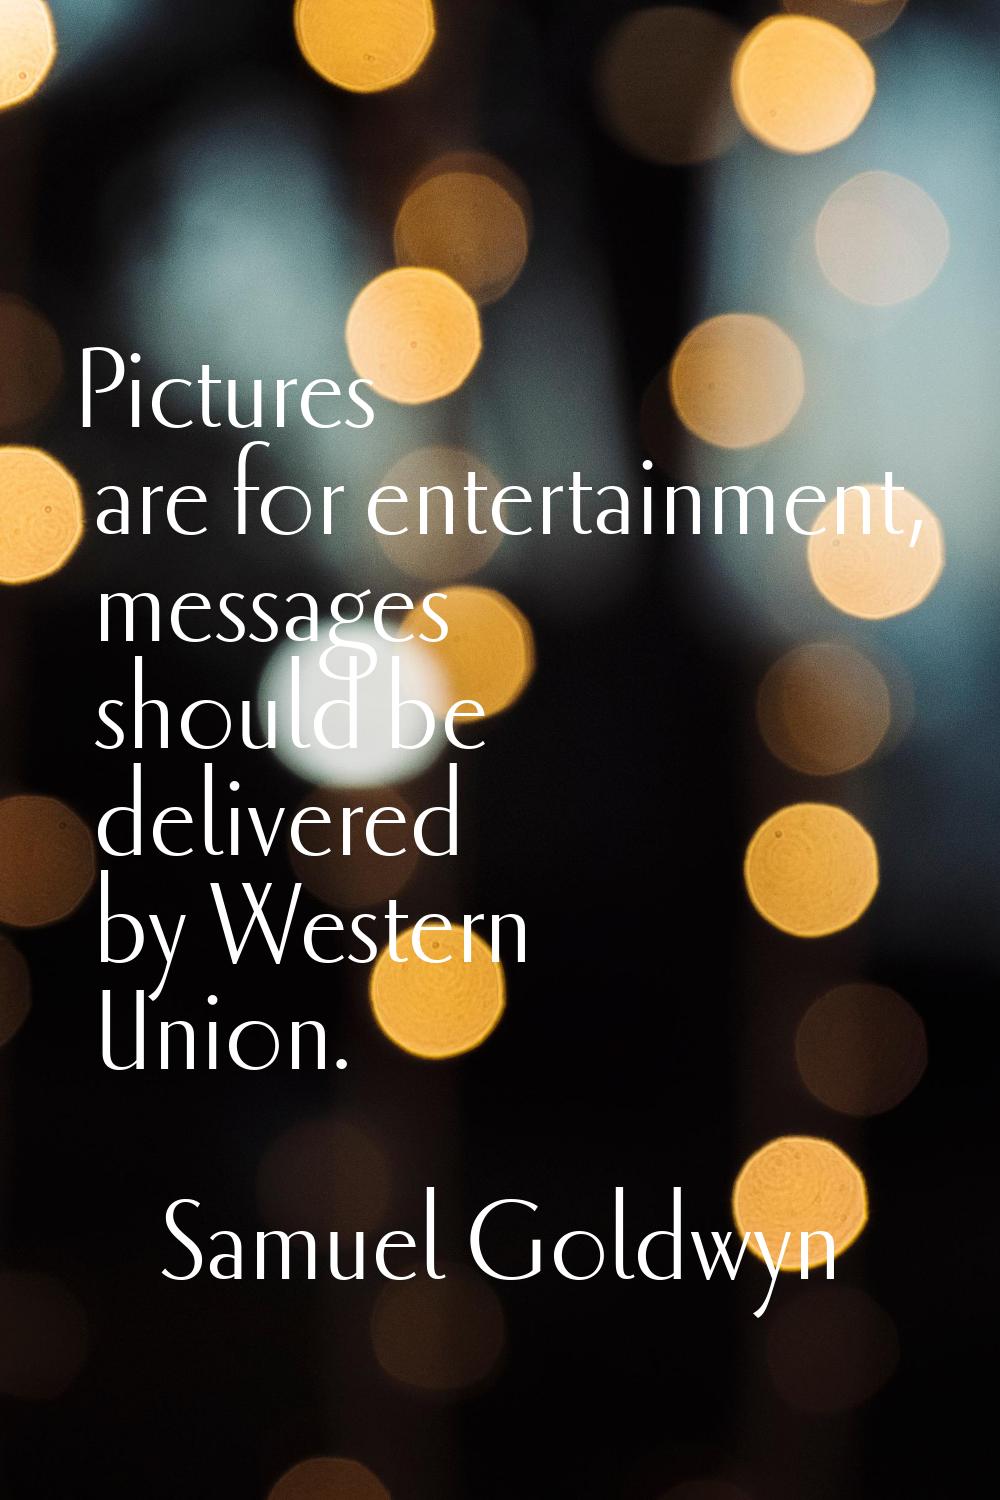 Pictures are for entertainment, messages should be delivered by Western Union.